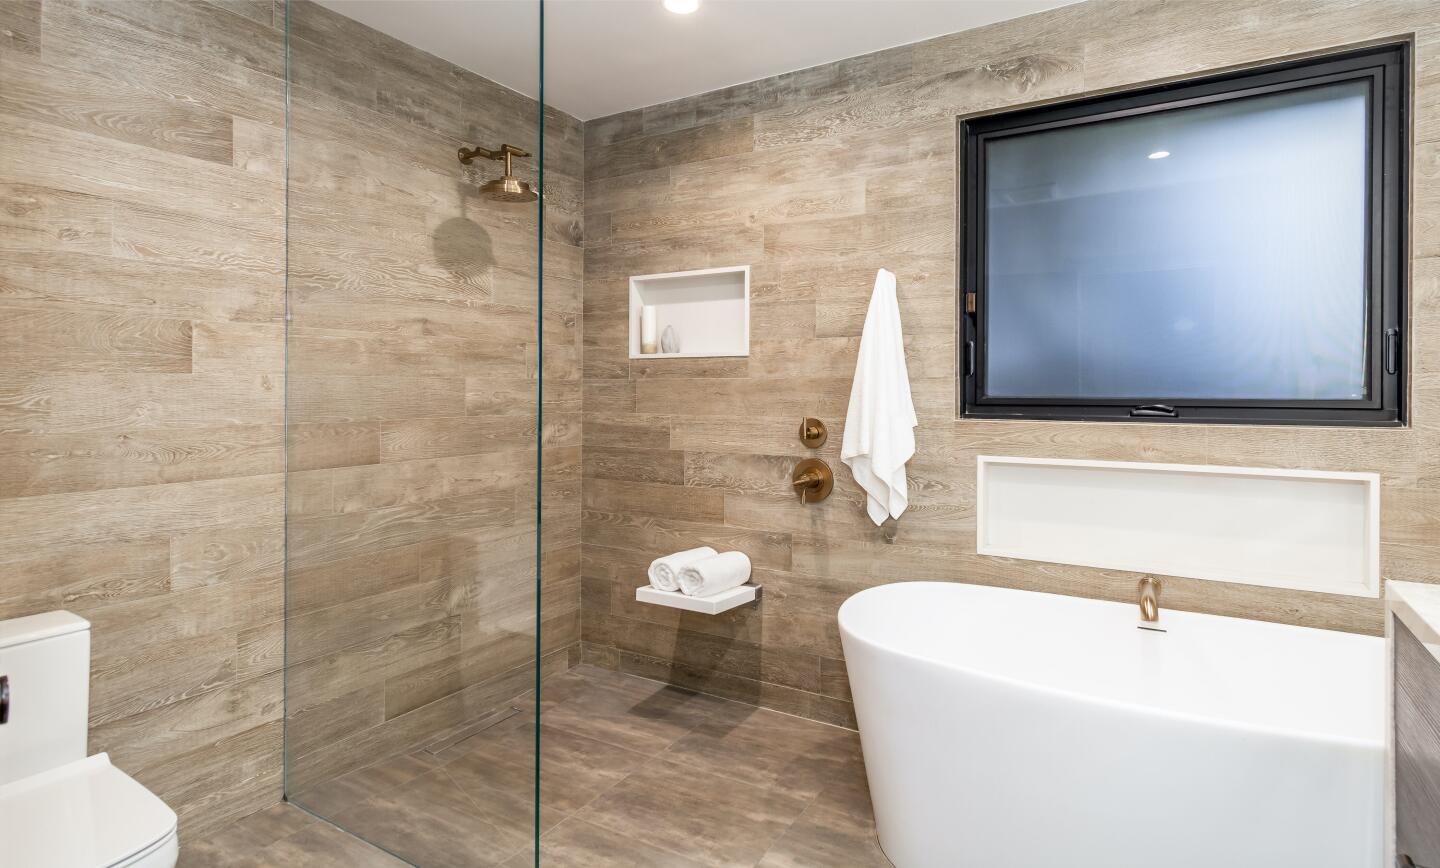 The primary bathroom with a freestanding tub.